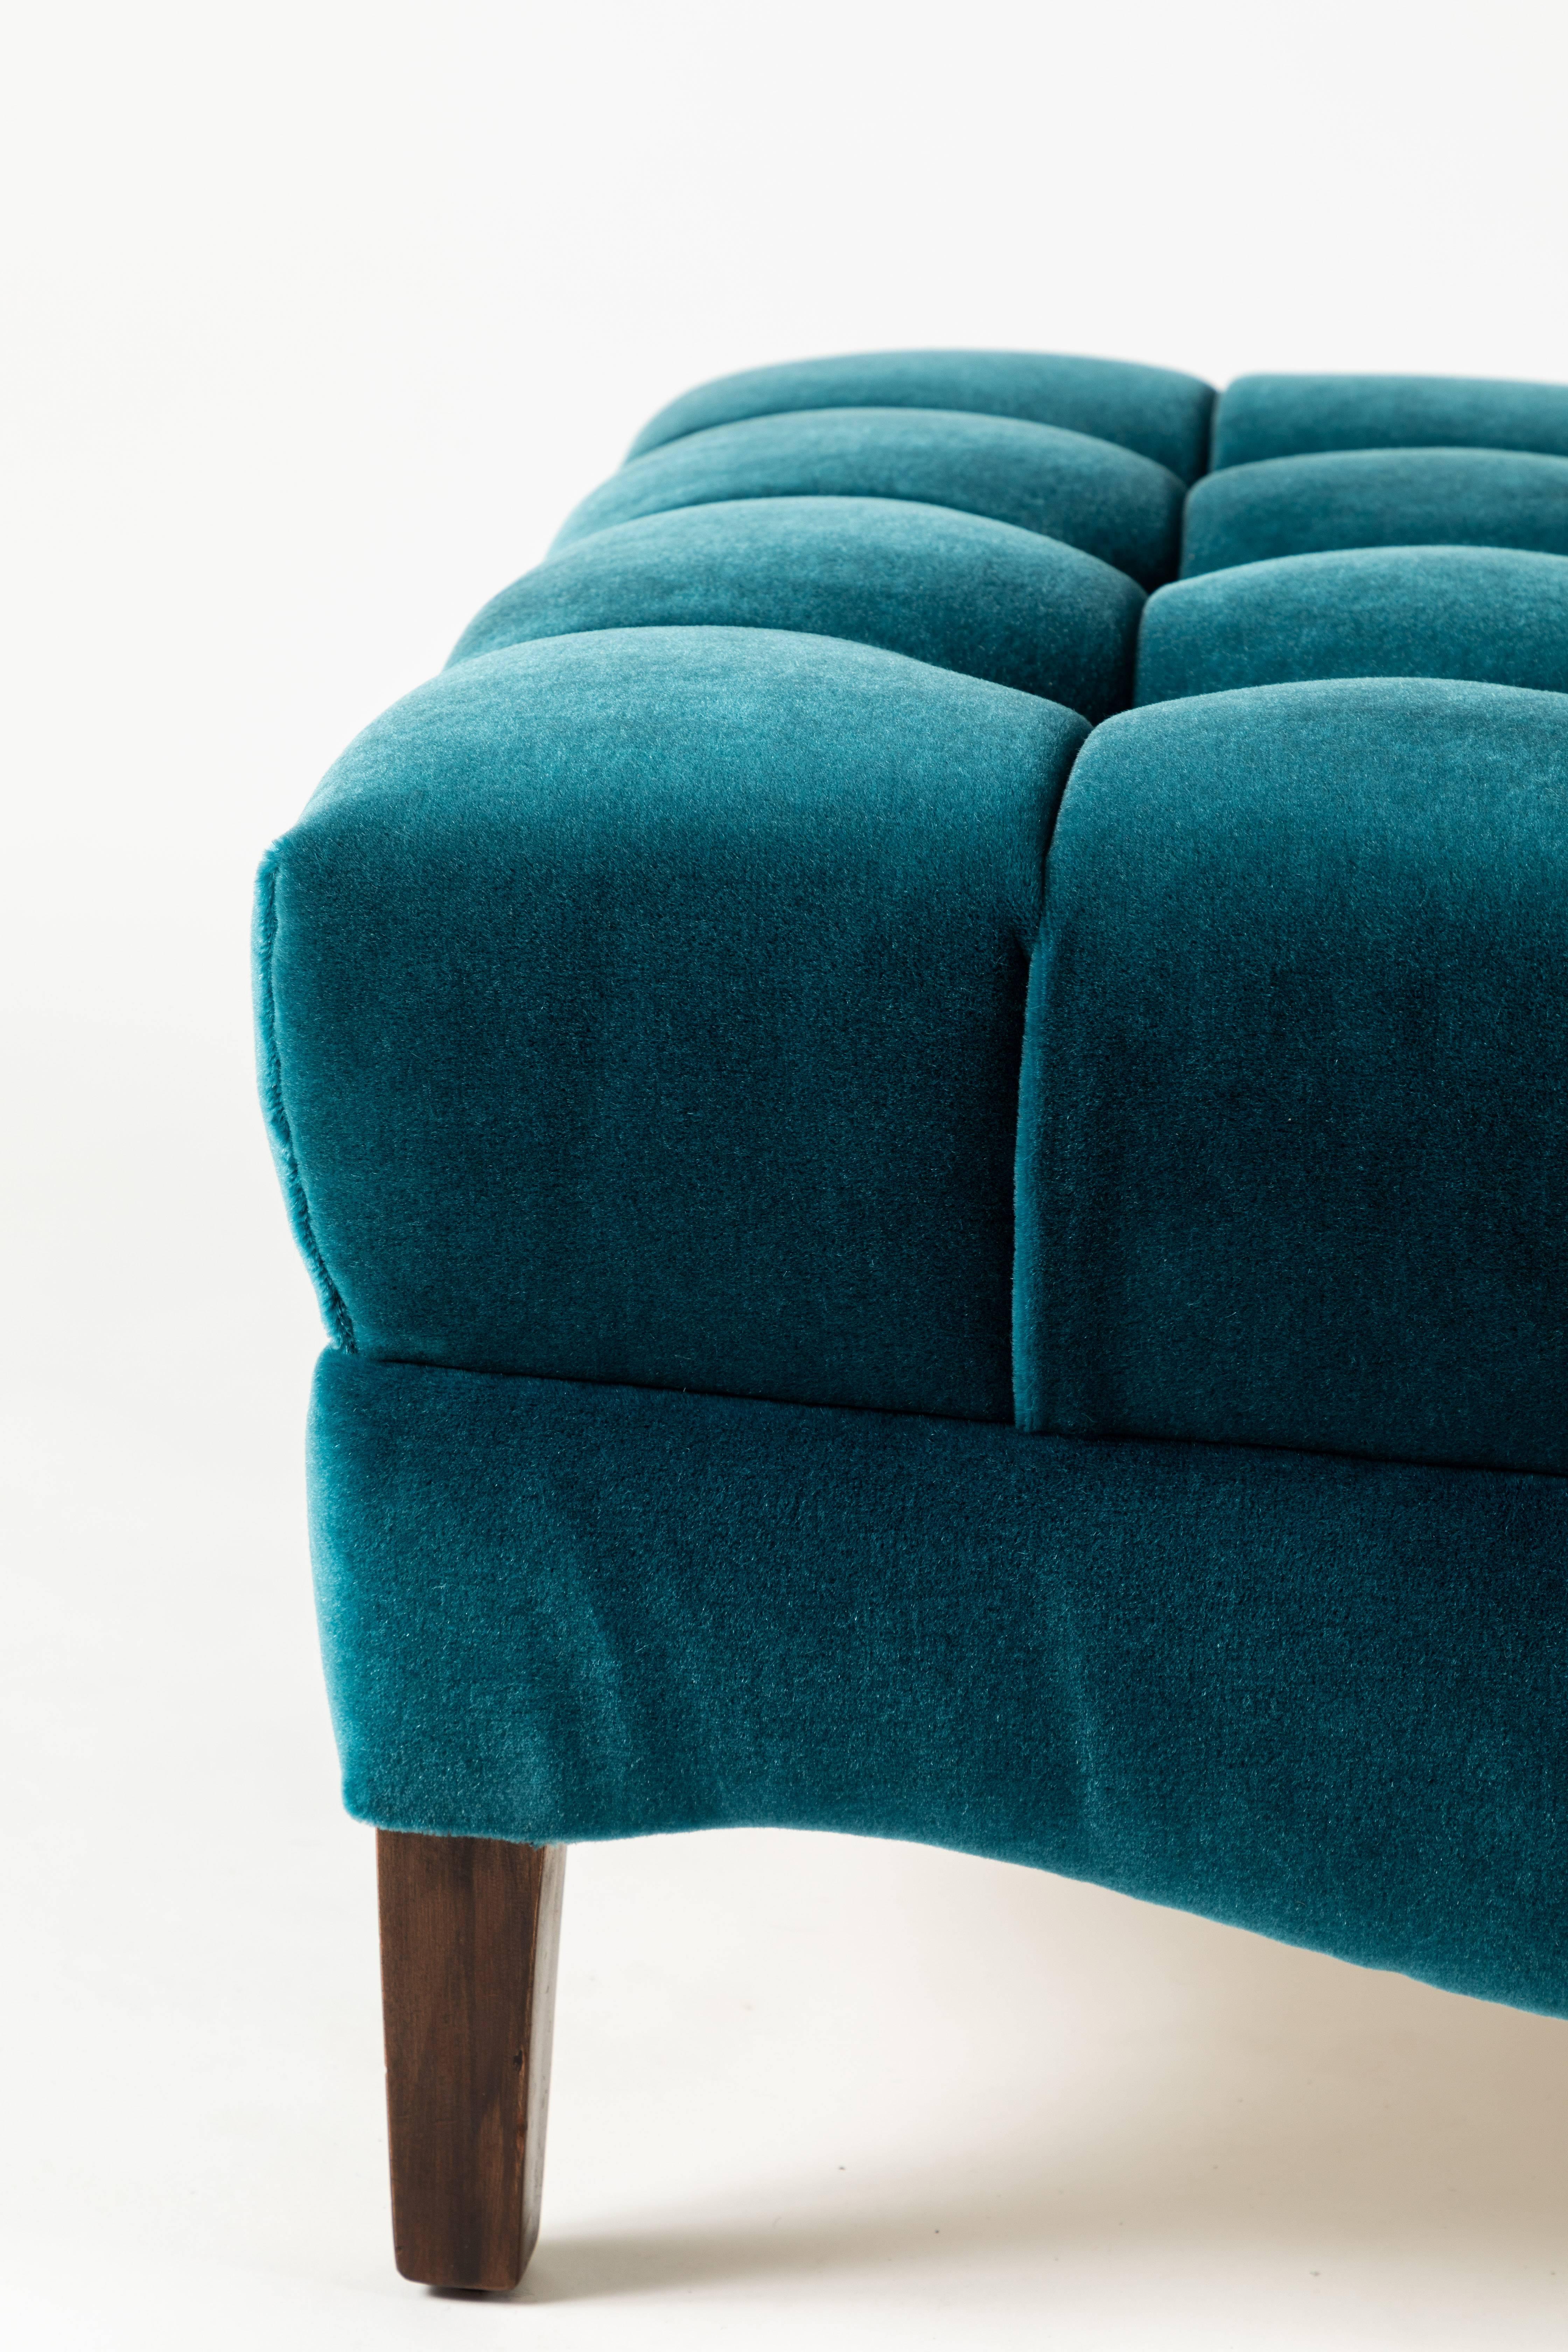 Mid-20th Century Pair of Biscuit-Tufted Slipper Chairs Covered in Teal Mohair